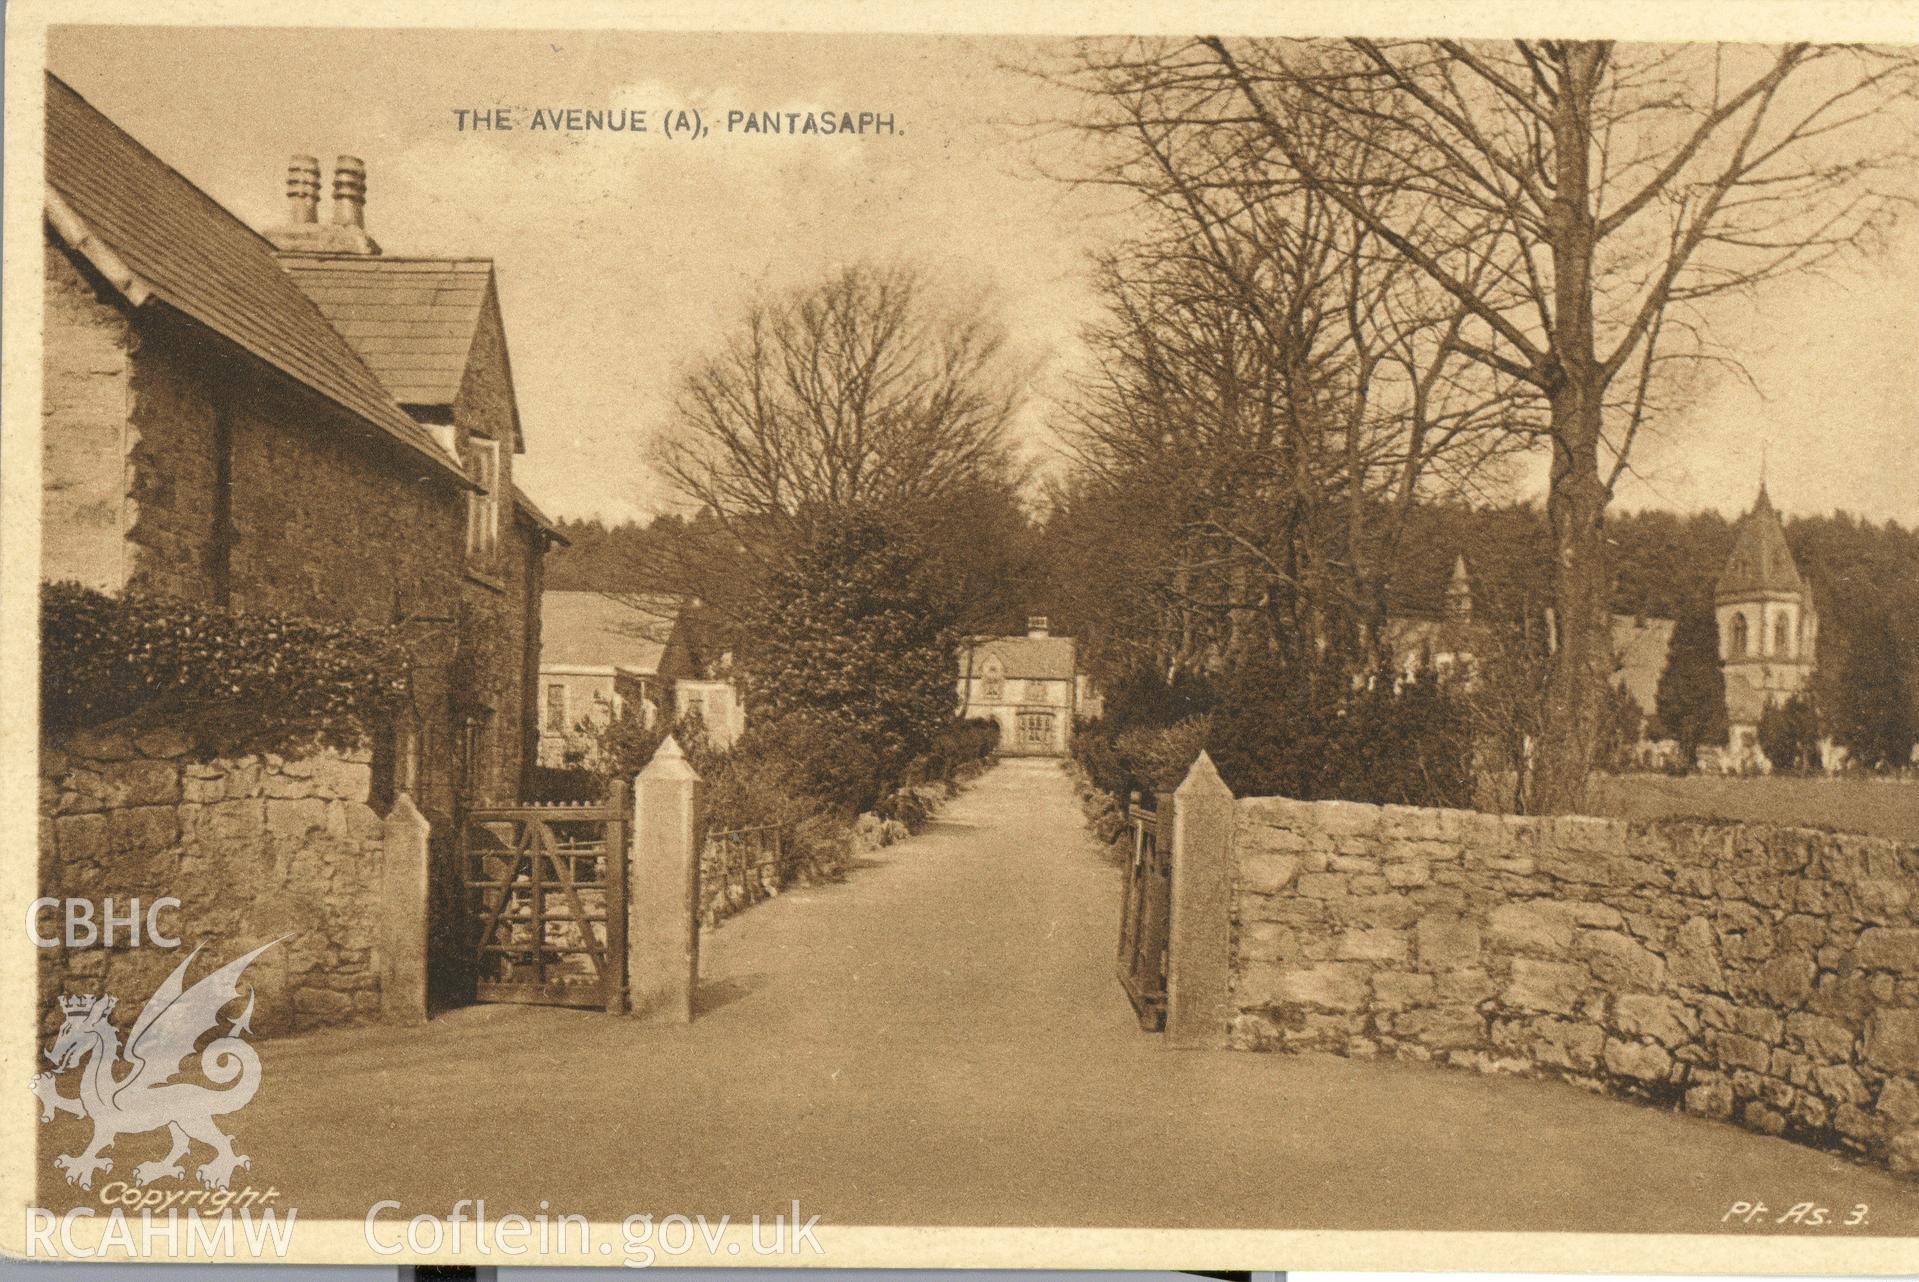 Digitised postcard image of the Avenue, Franciscan Friary, Pantasaph, Copyright Pt. As. 3. Produced by Parks and Gardens Data Services, from an original item in the Peter Davis Collection at Parks and Gardens UK. We hold only web-resolution images of this collection, suitable for viewing on screen and for research purposes only. We do not hold the original images, or publication quality scans.